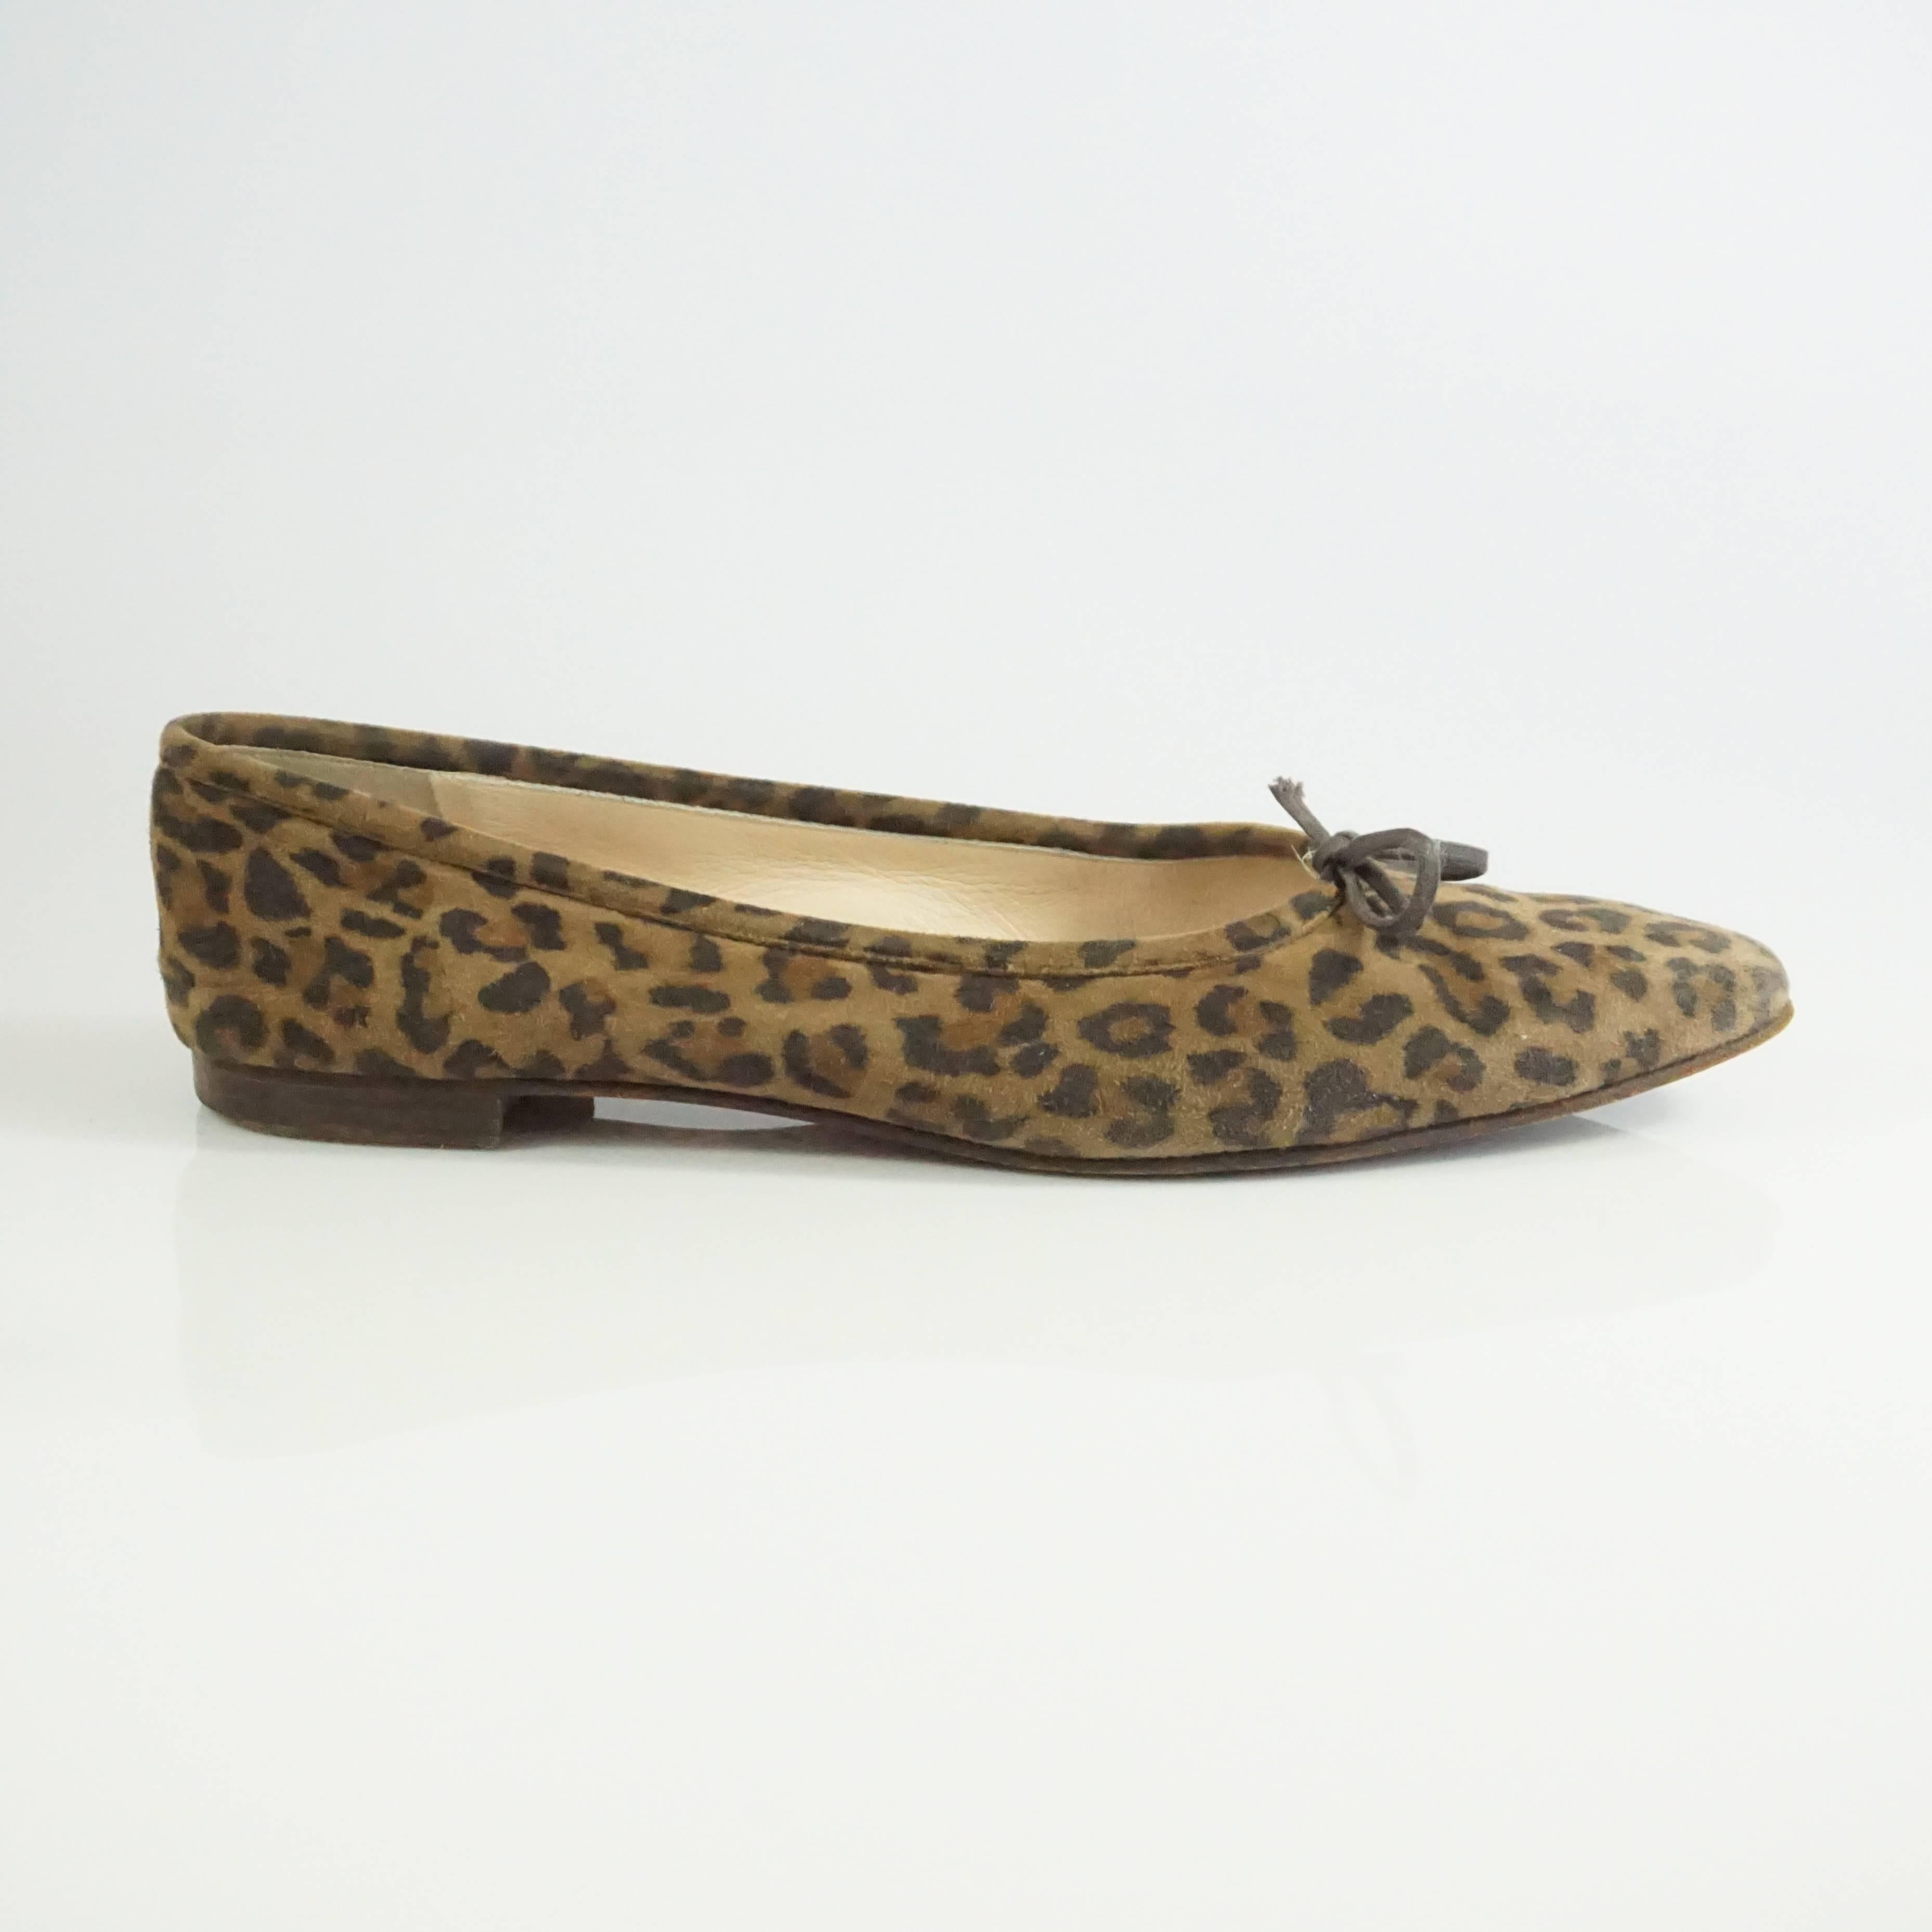 These Manolo Blahnik flats are made of suede and have a animal print all over. The flats also have a slight pointed toe and a small bow in the front. They are in fair condition with some wear to the bottom, heels, interior, and sides (all seen in